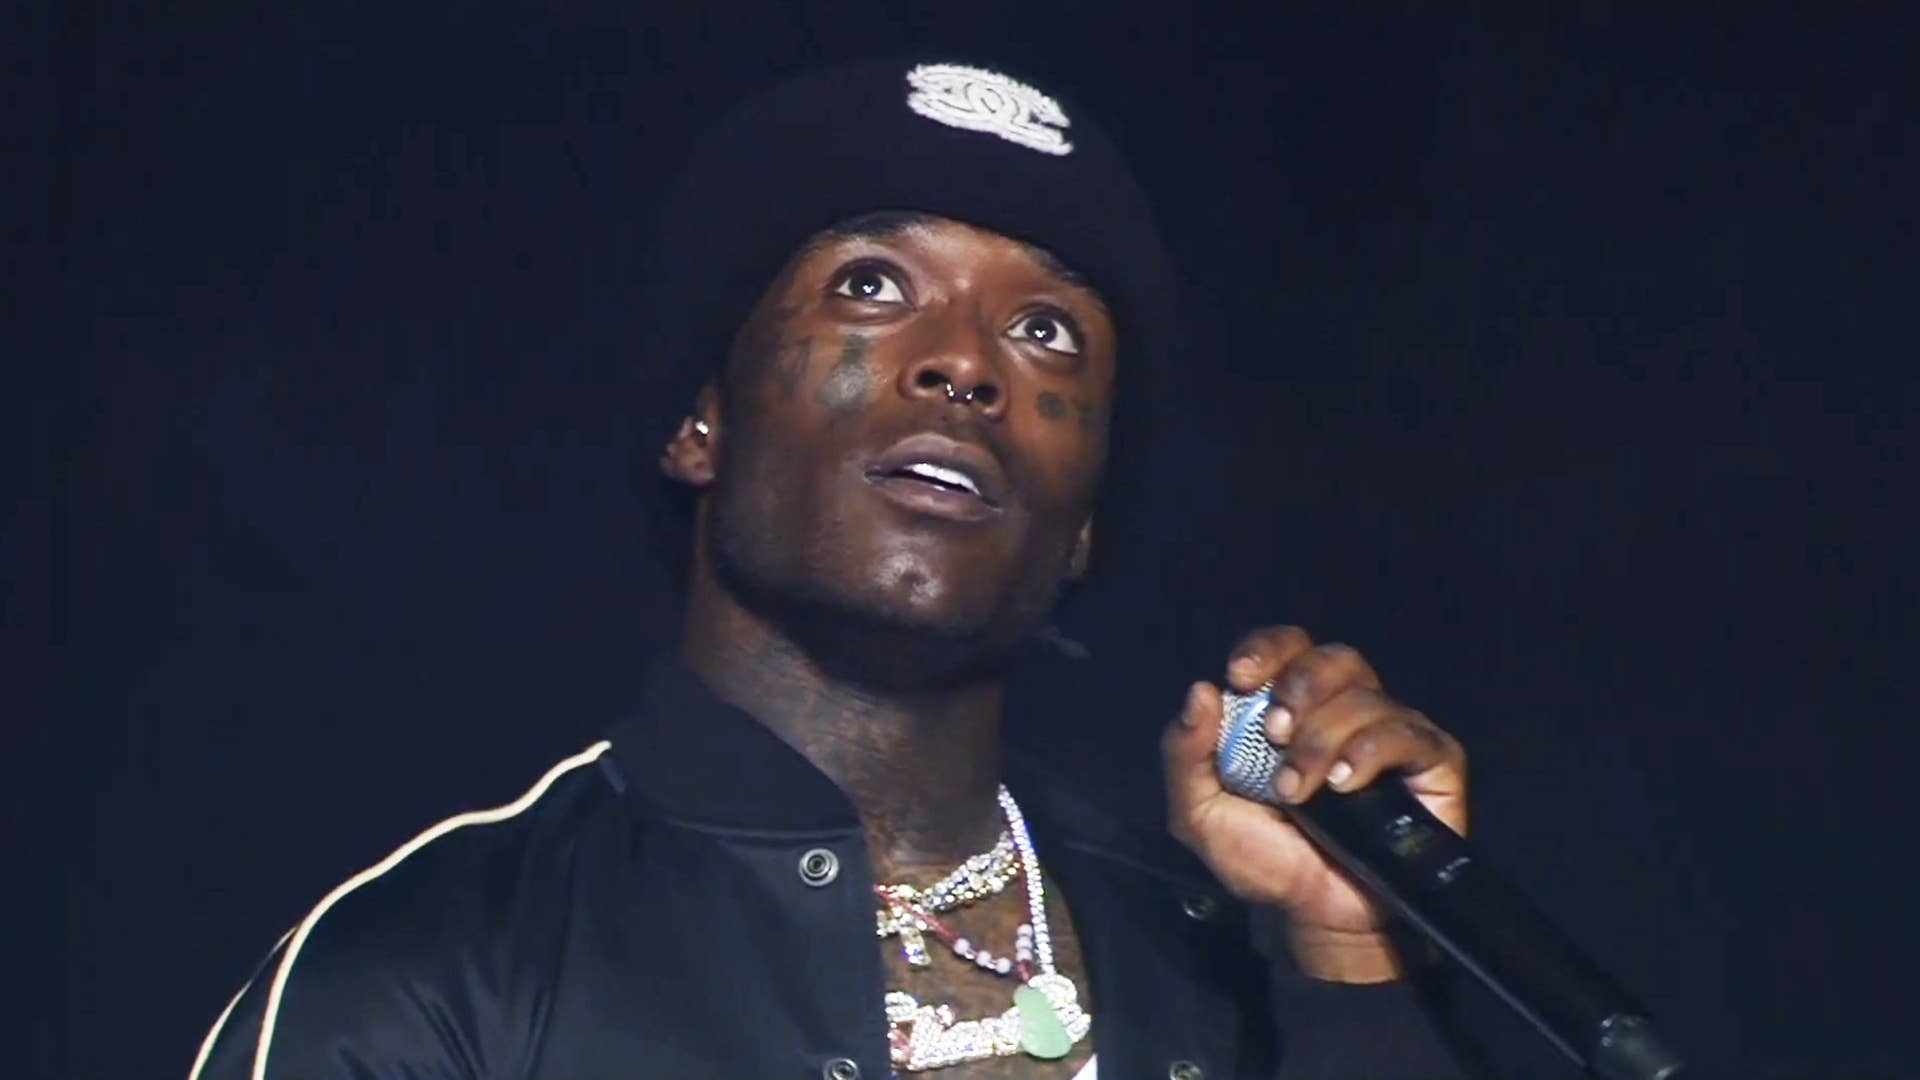 Lil Uzi Vert's $15 Virtual Show Was as Weird as He Said It Would